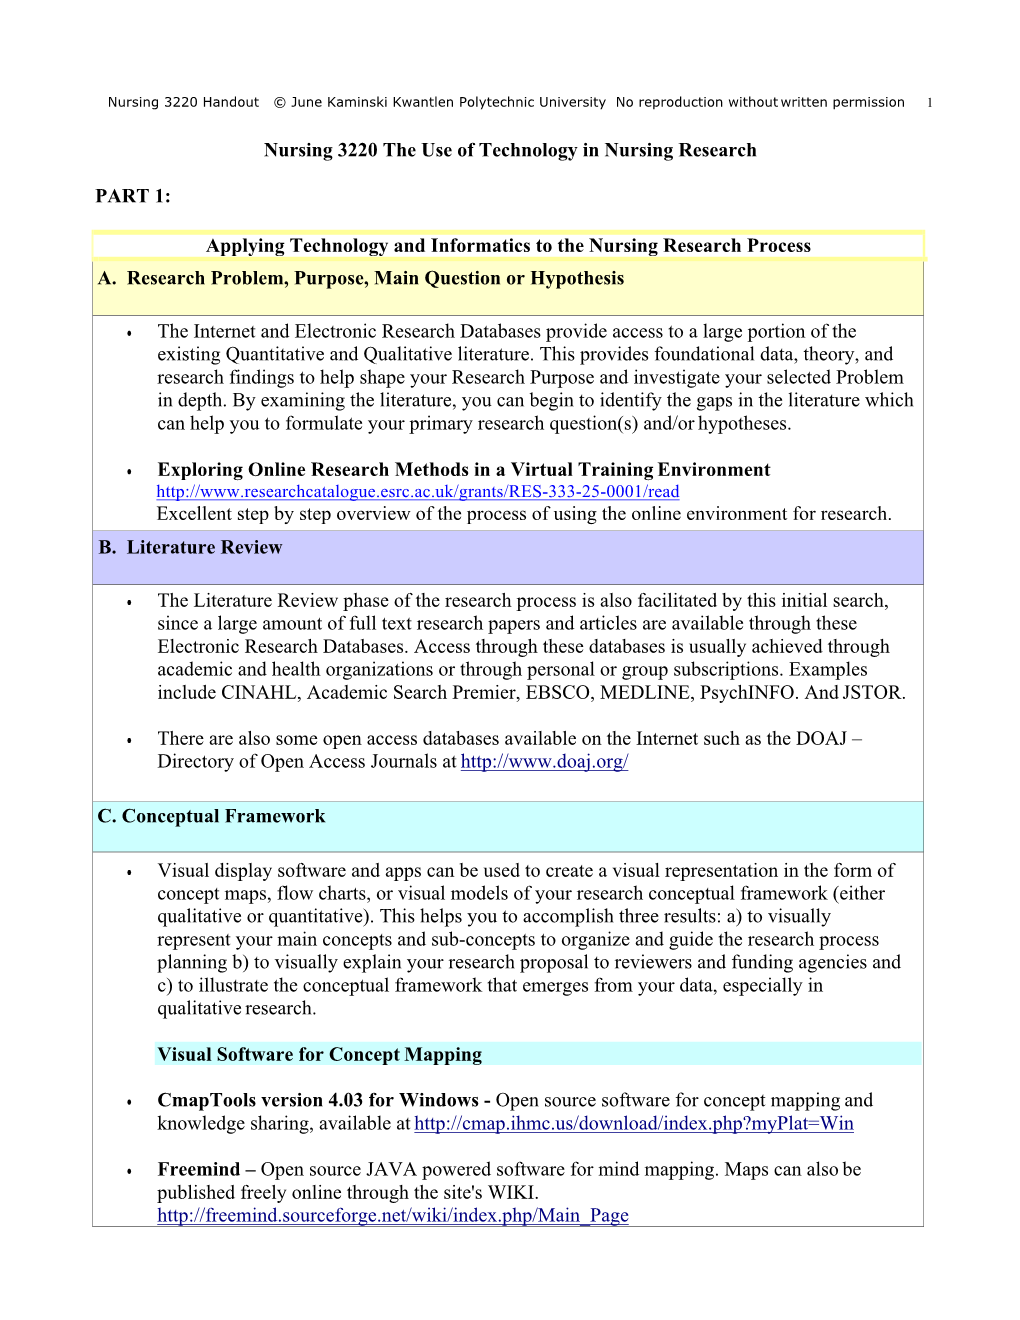 Applying Technology and Informatics to the Nursing Research Process A